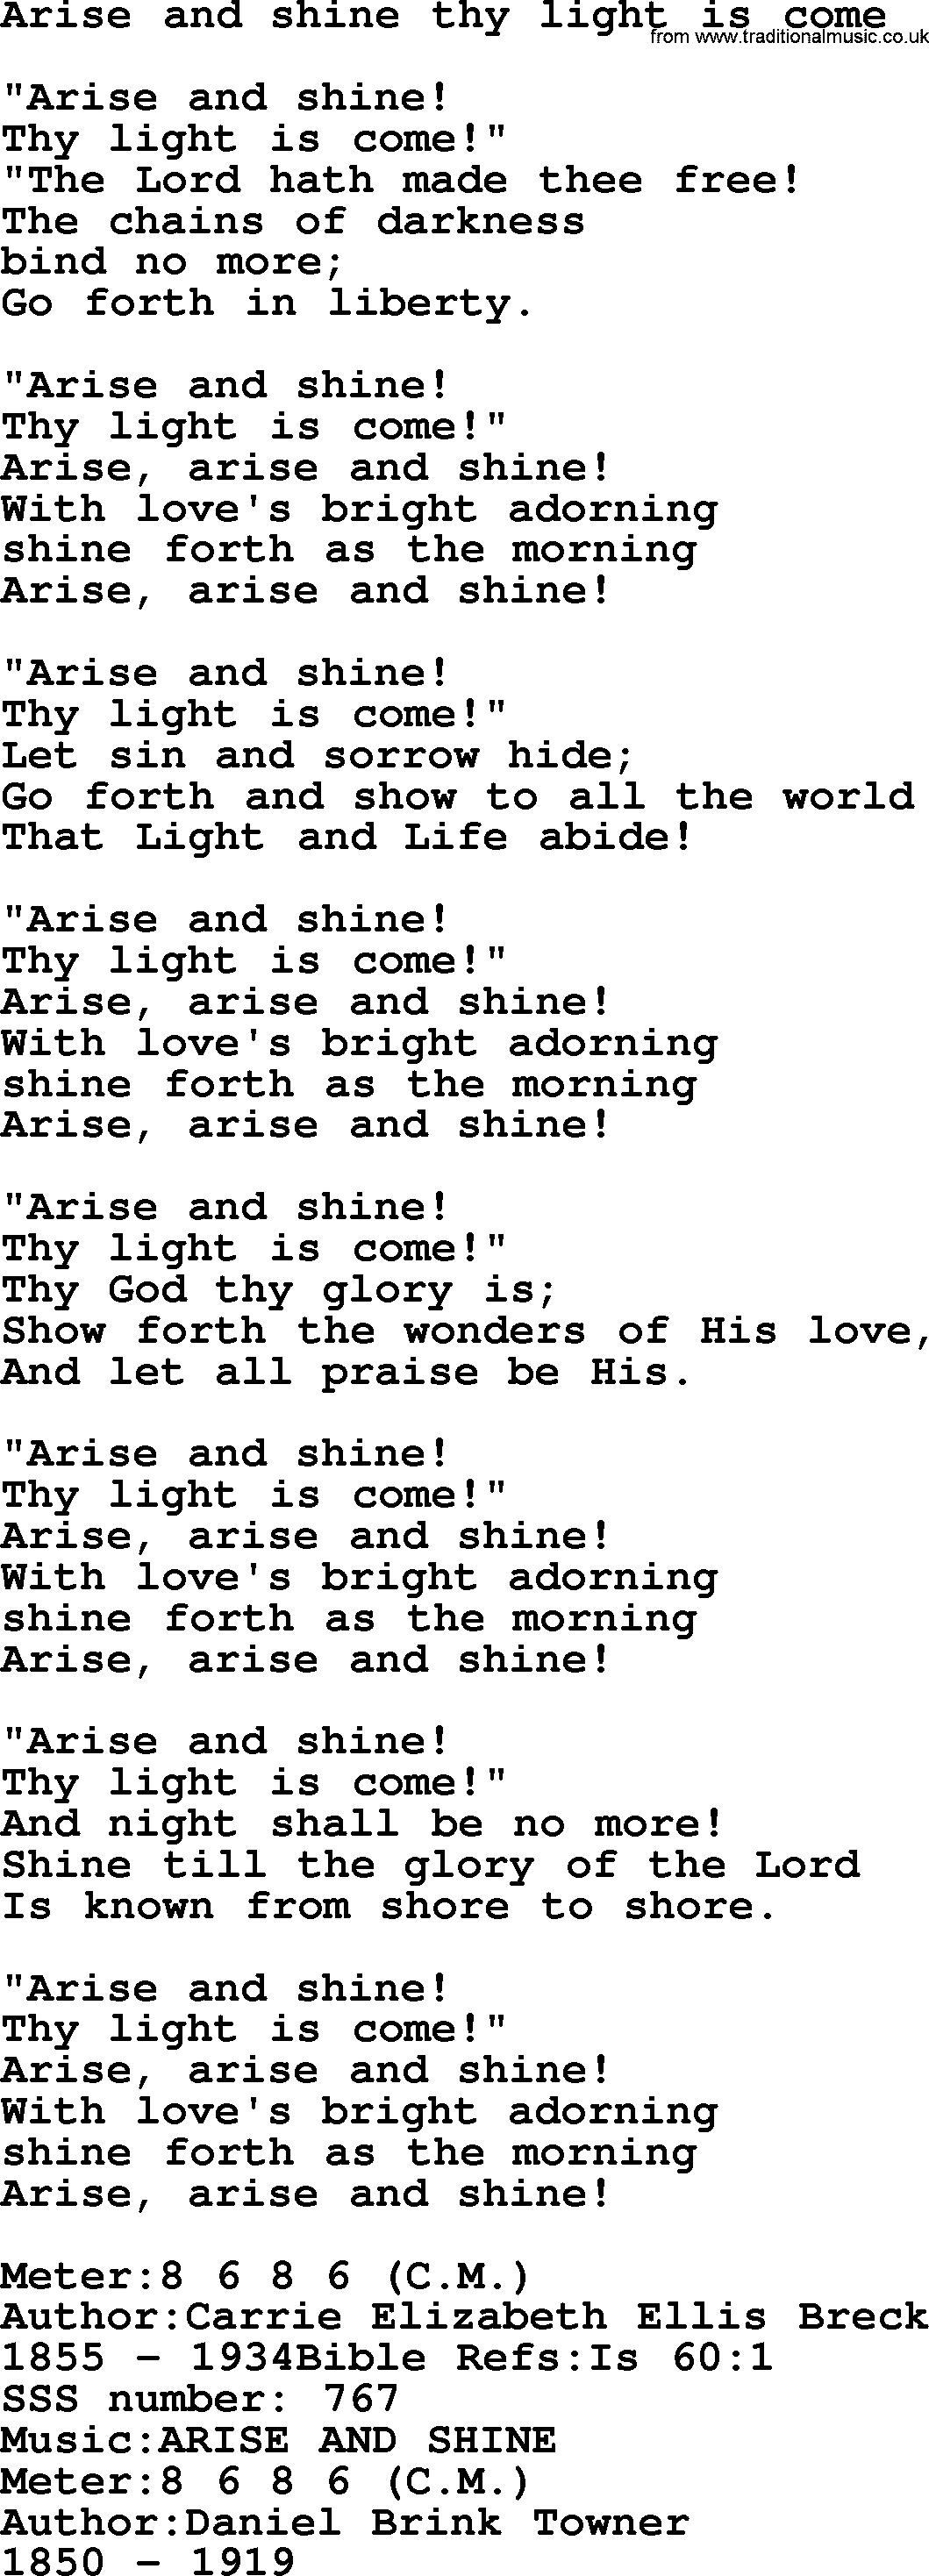 Sacred Songs and Solos complete, 1200 Hymns, title: Arise And Shine Thy Light Is Come, lyrics and PDF